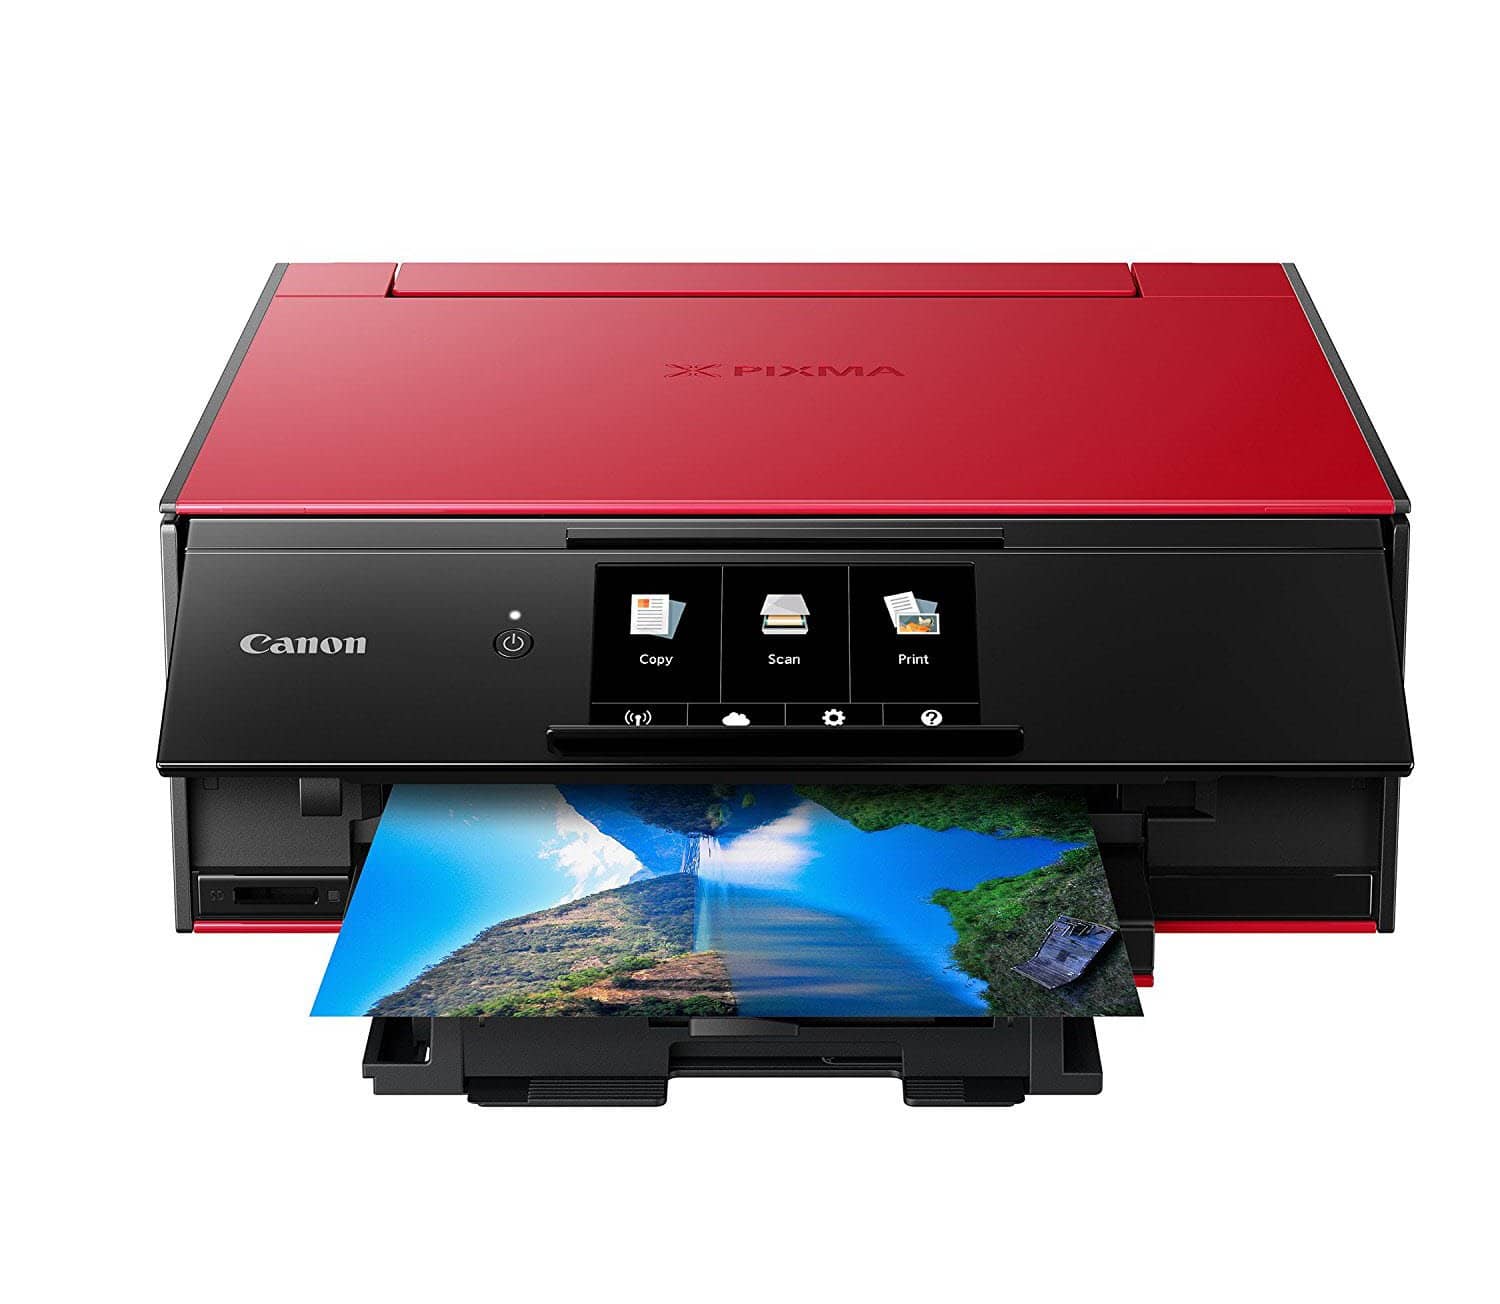 Canon TS9120 Wireless All-In-One Printer with Scanner and Copier - Red